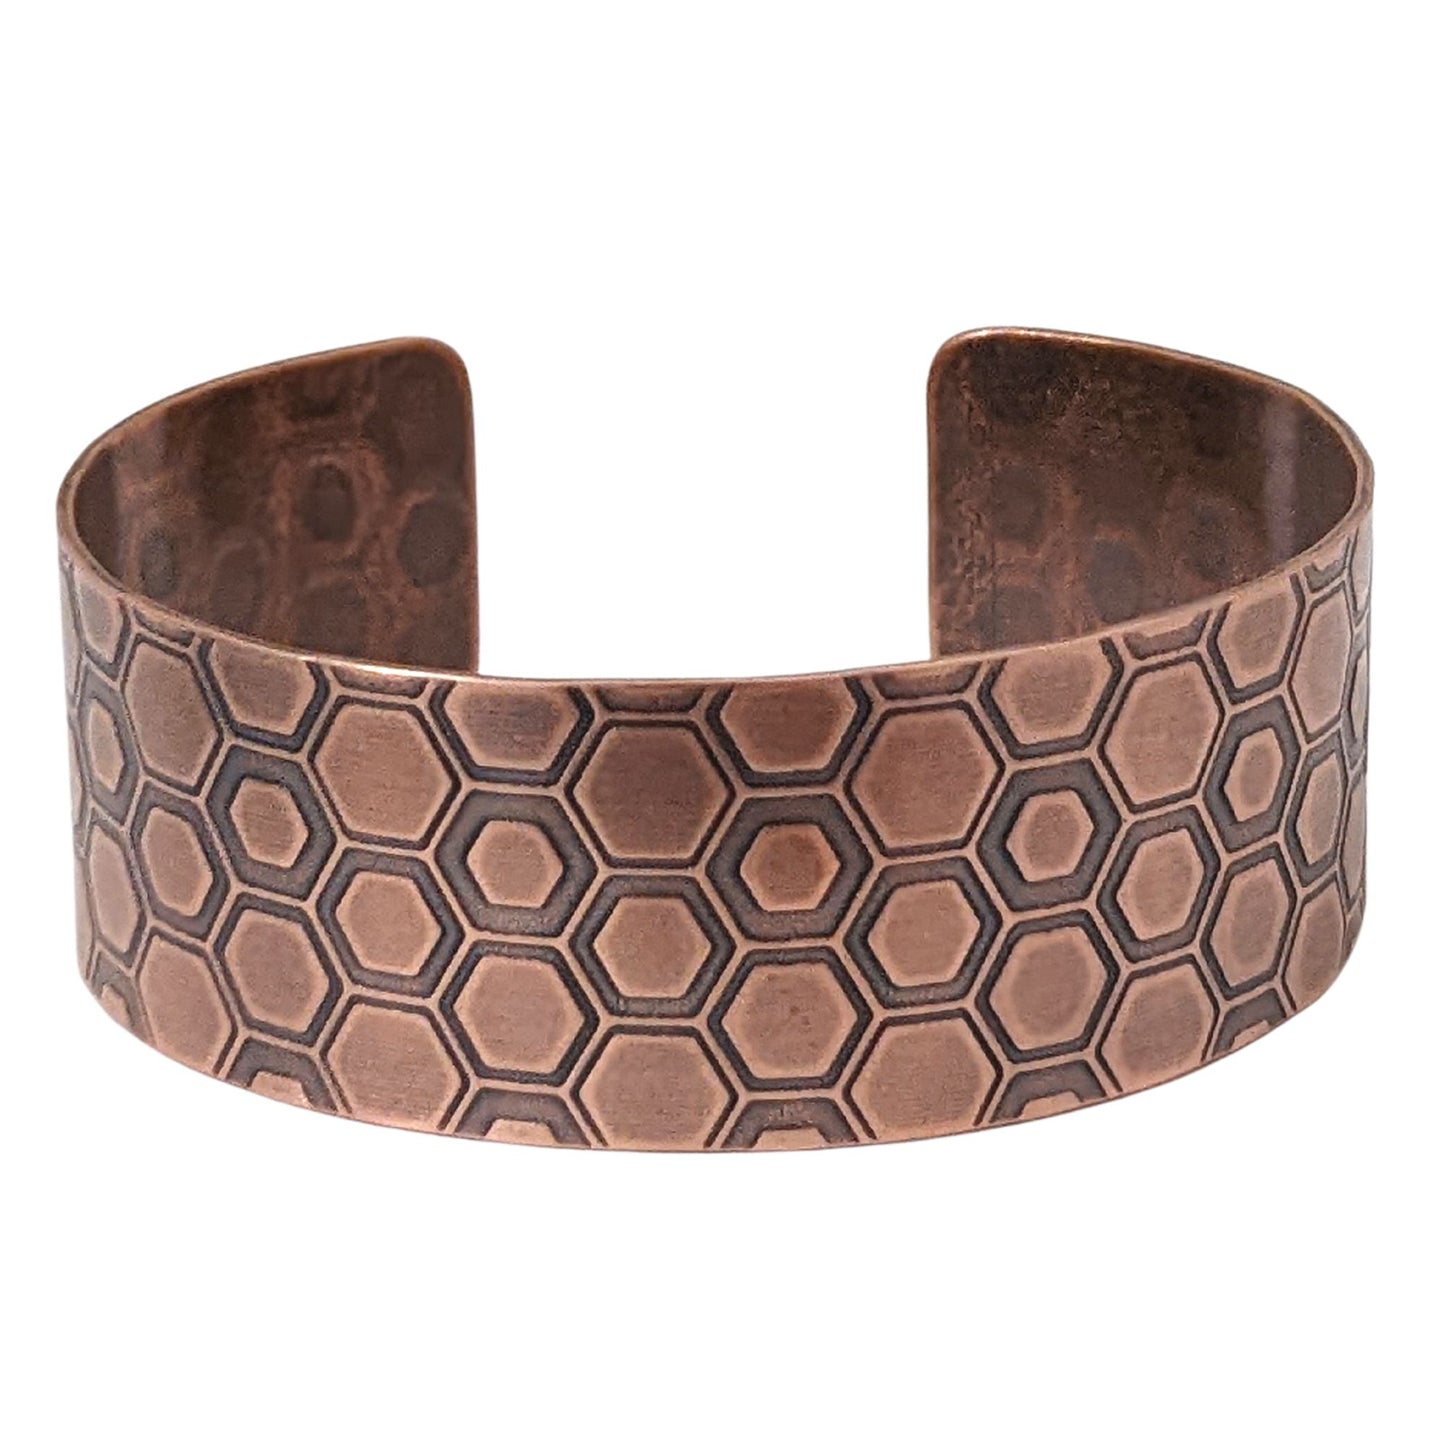 One inch wide copper cuff bracelet with a honeycomb pattern. Each vertical row of combs has a little over 3  combs. The comb edges are impressed into the copper and darkened to bring out the detail.